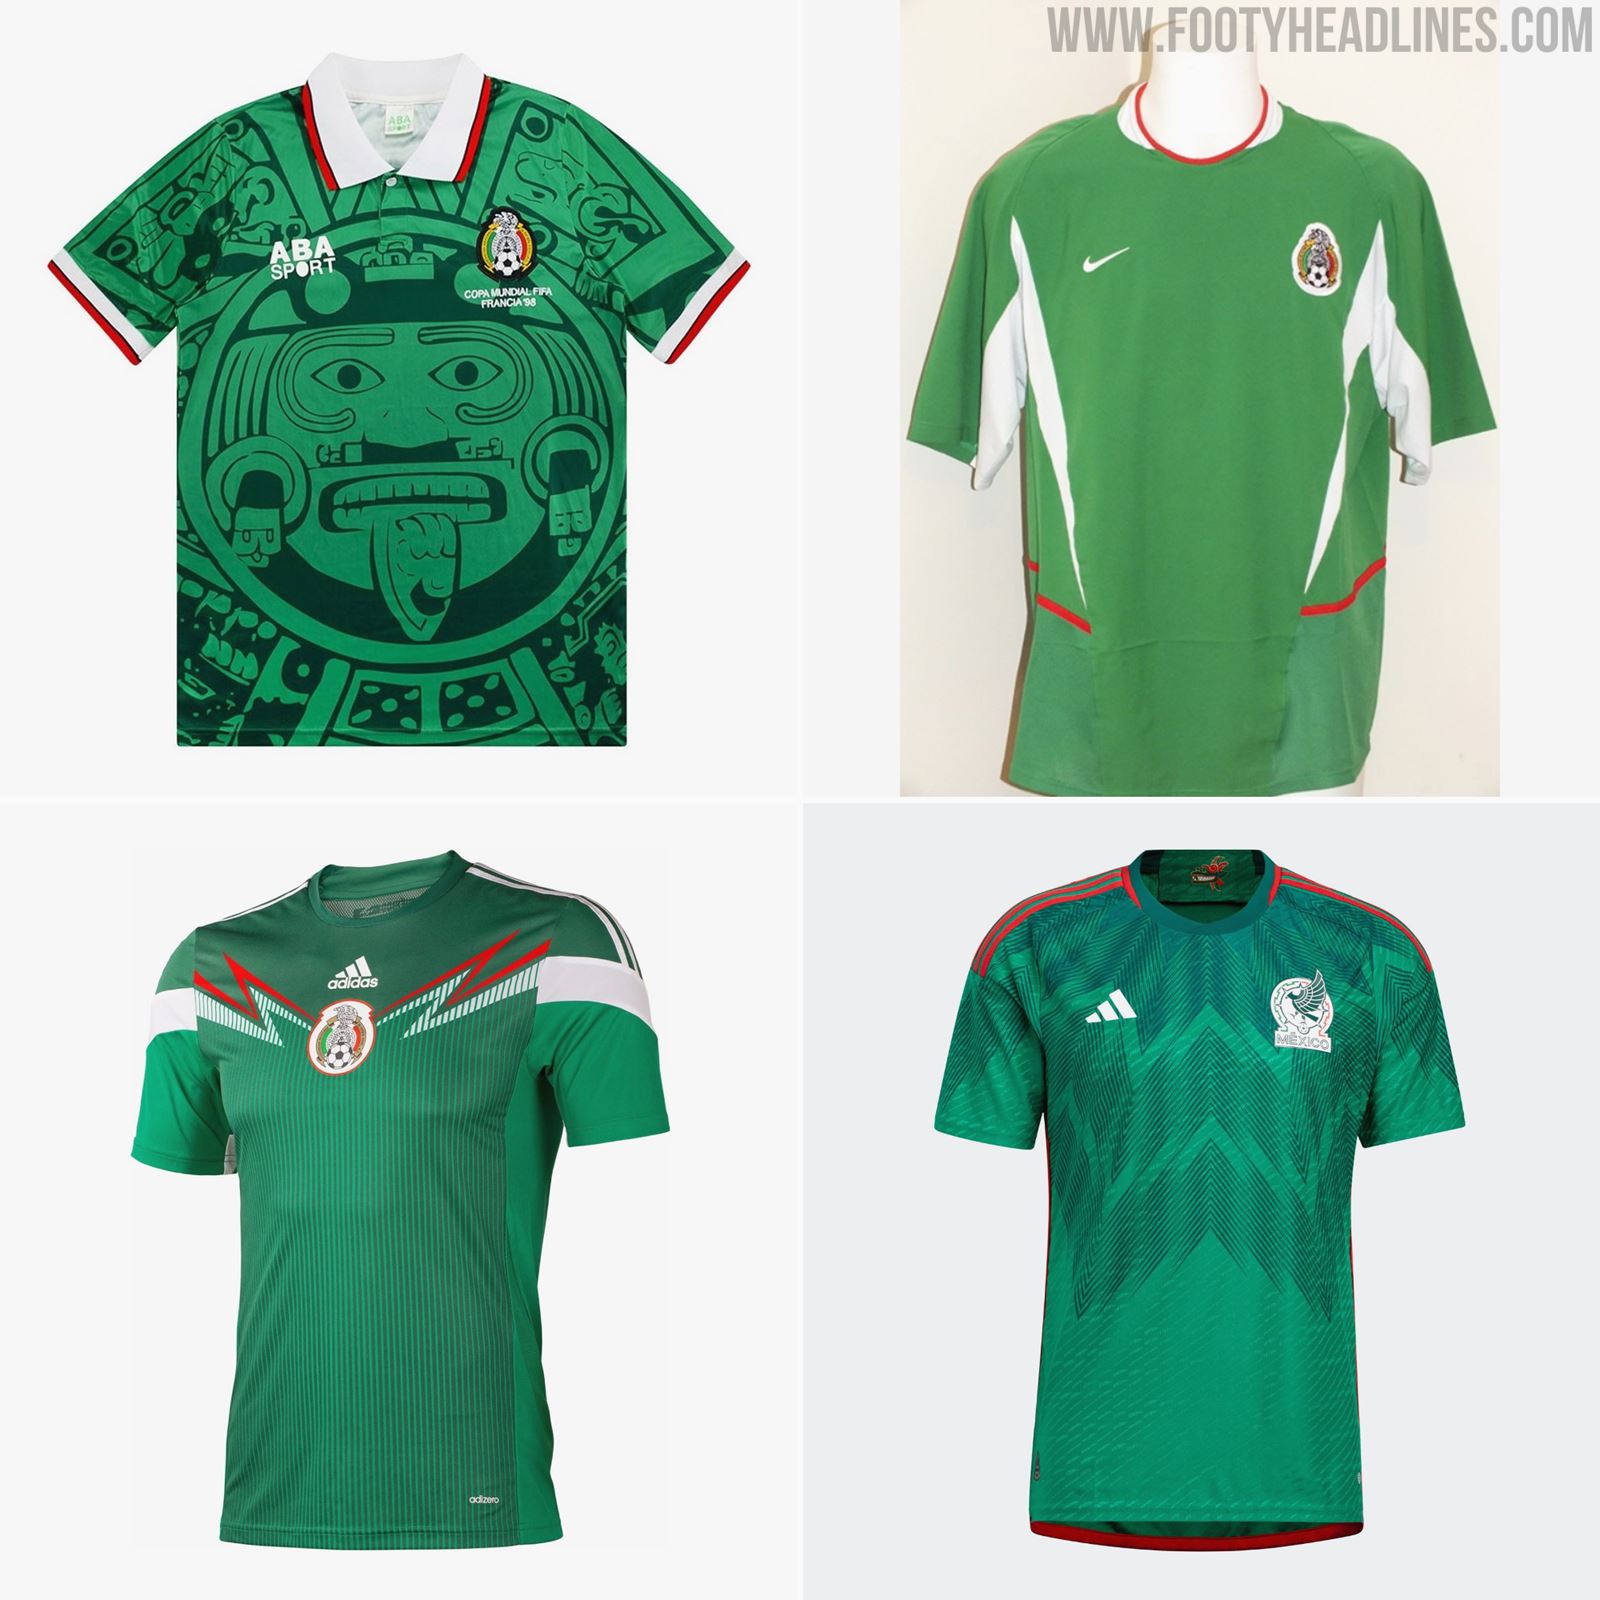 White Mexico 2014 World Cup Third Kit Leaked? - Footy Headlines